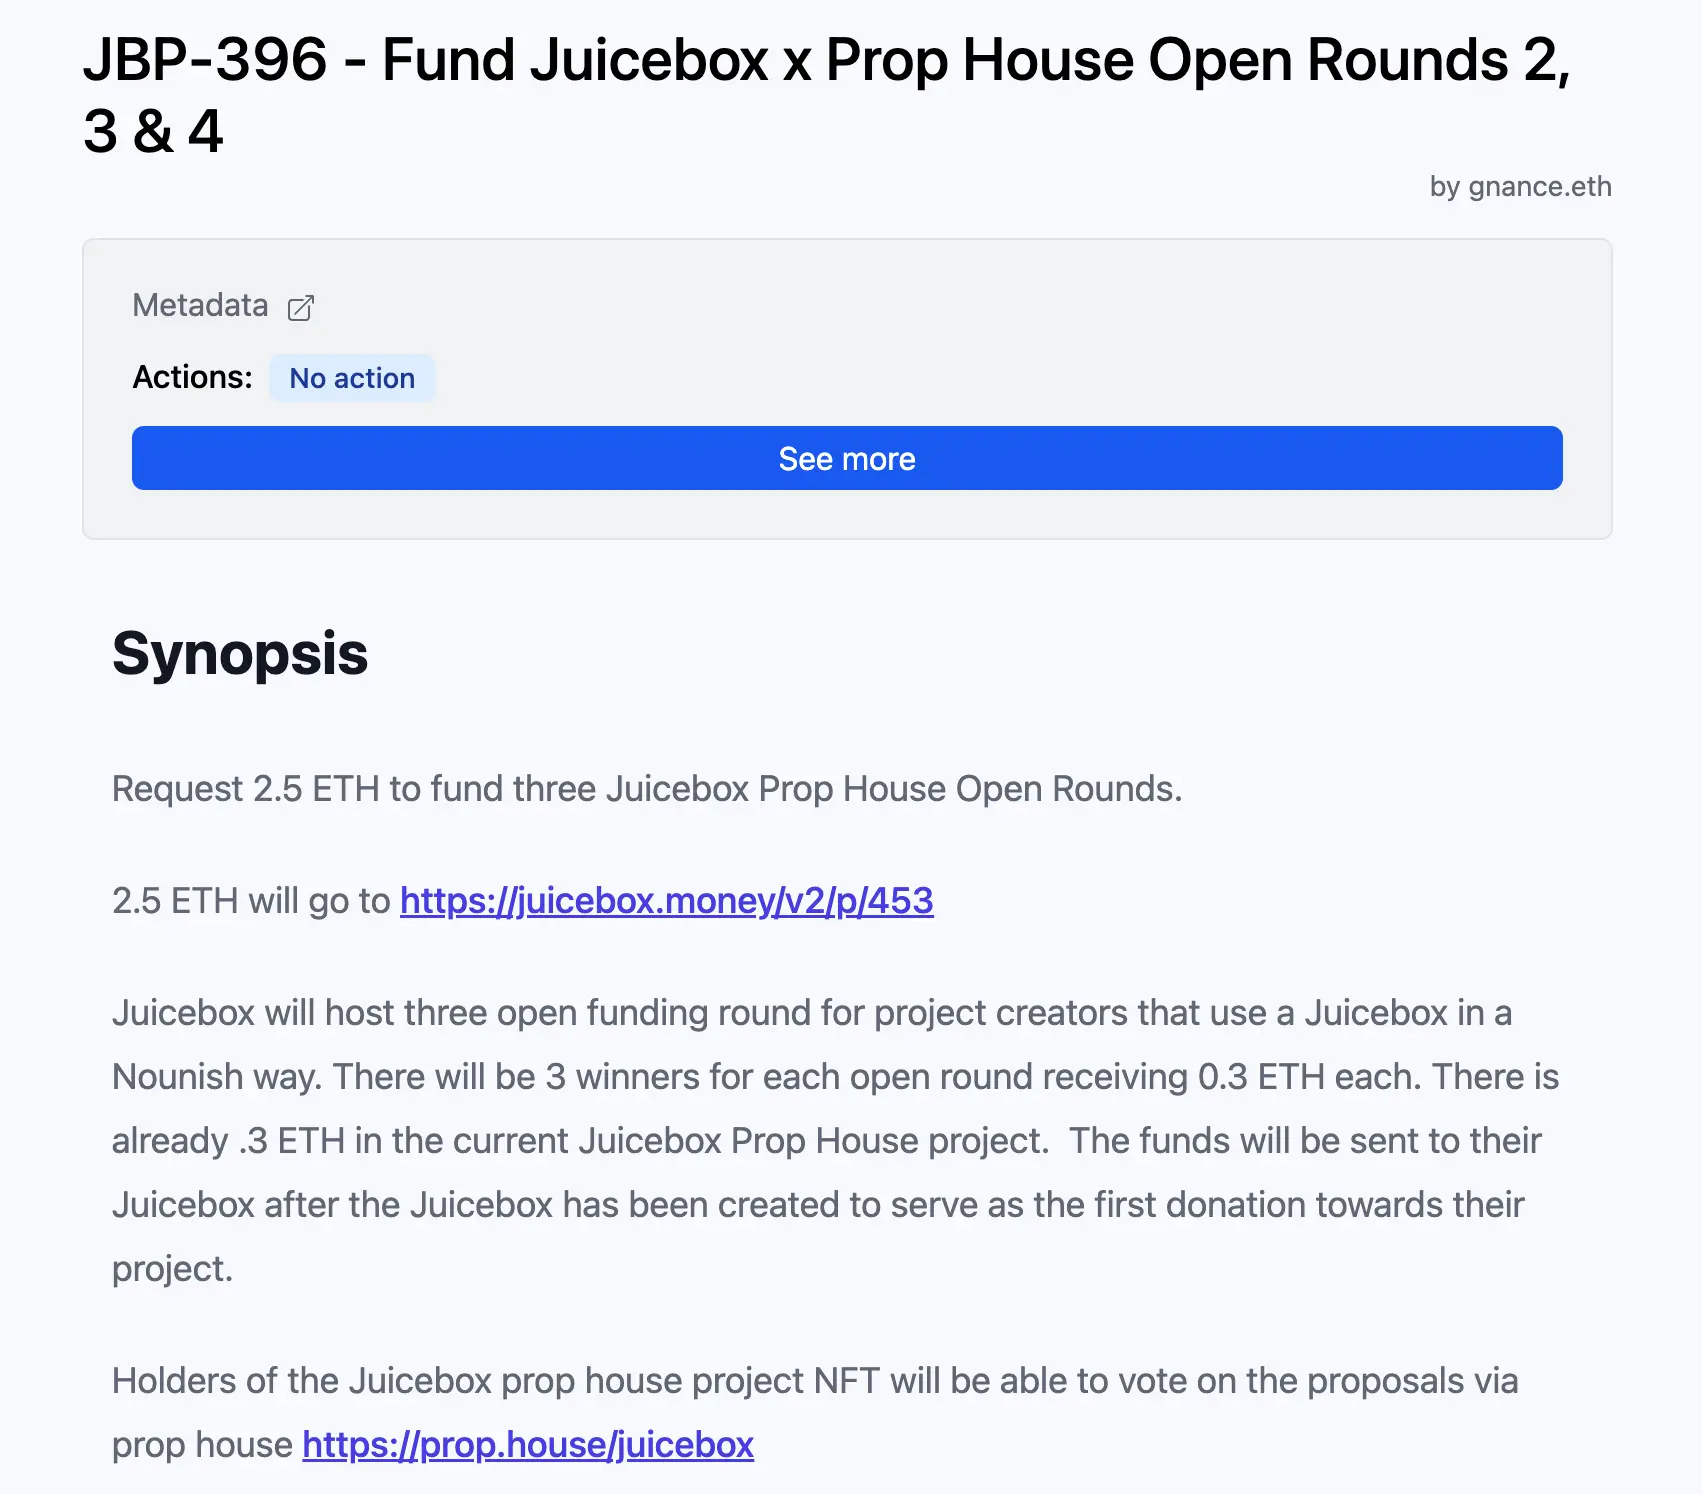 Proposal to fund more open rounds on prop house